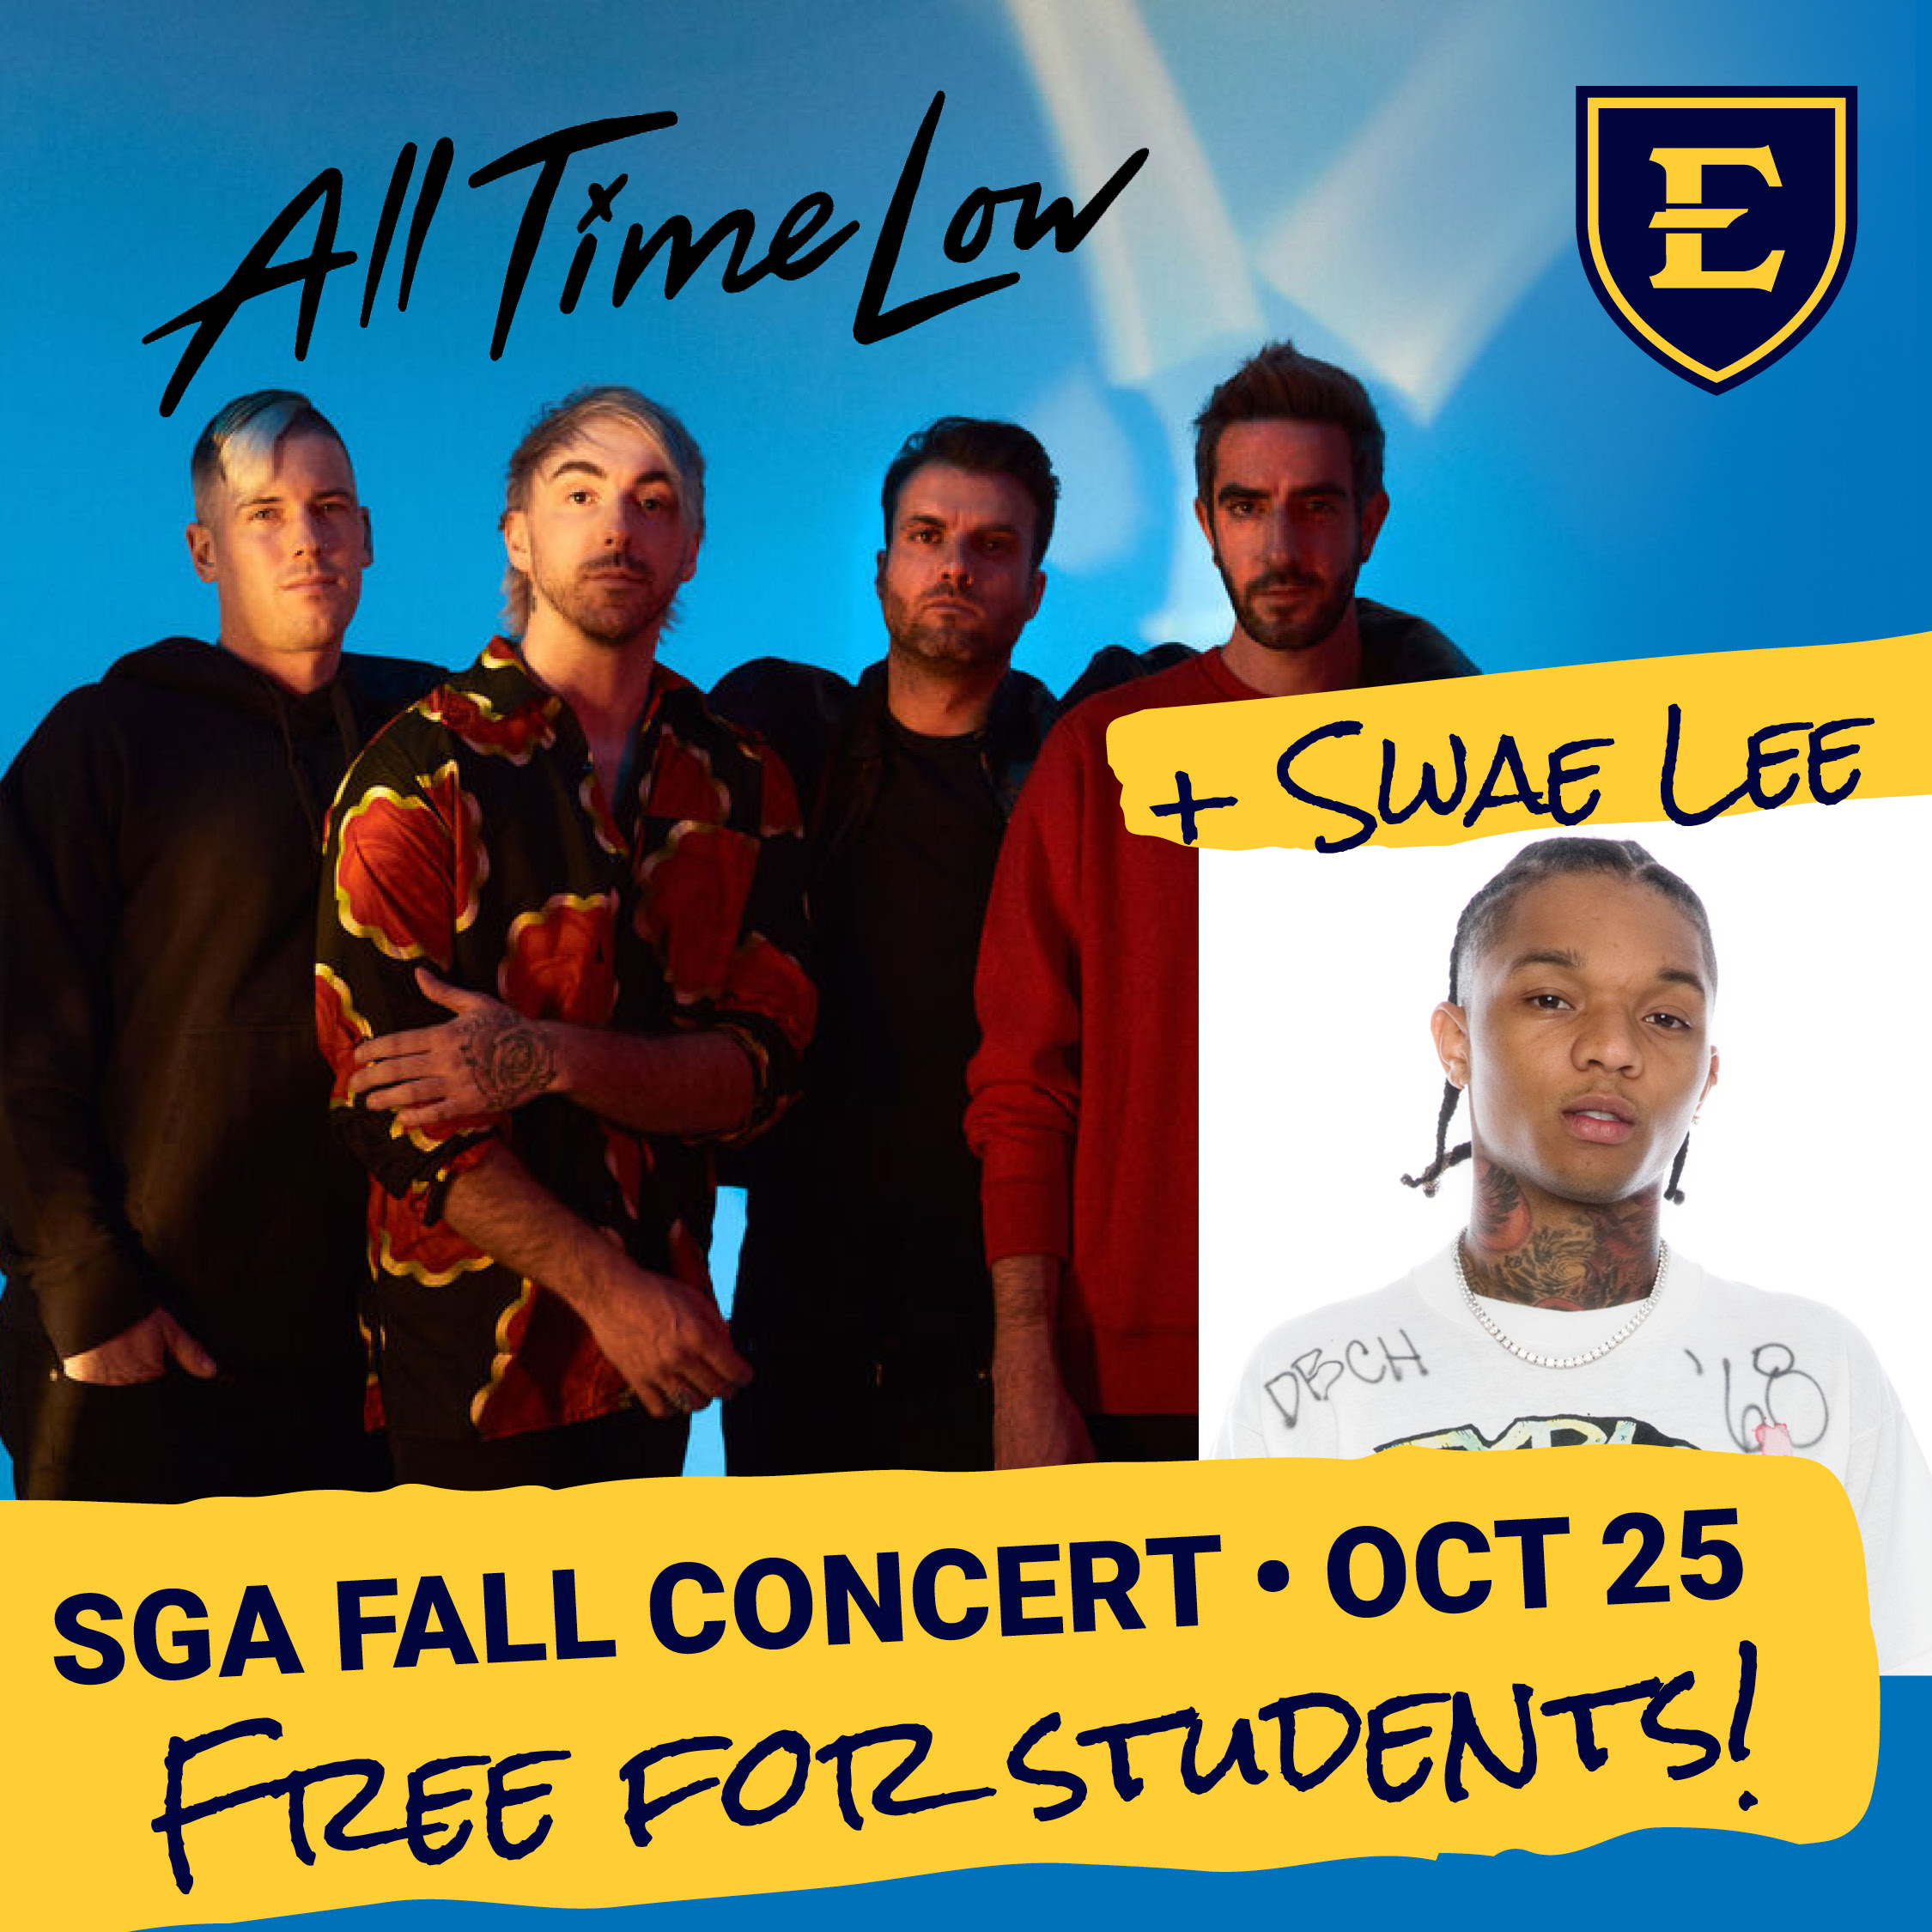 All Time Low and Swae Lee